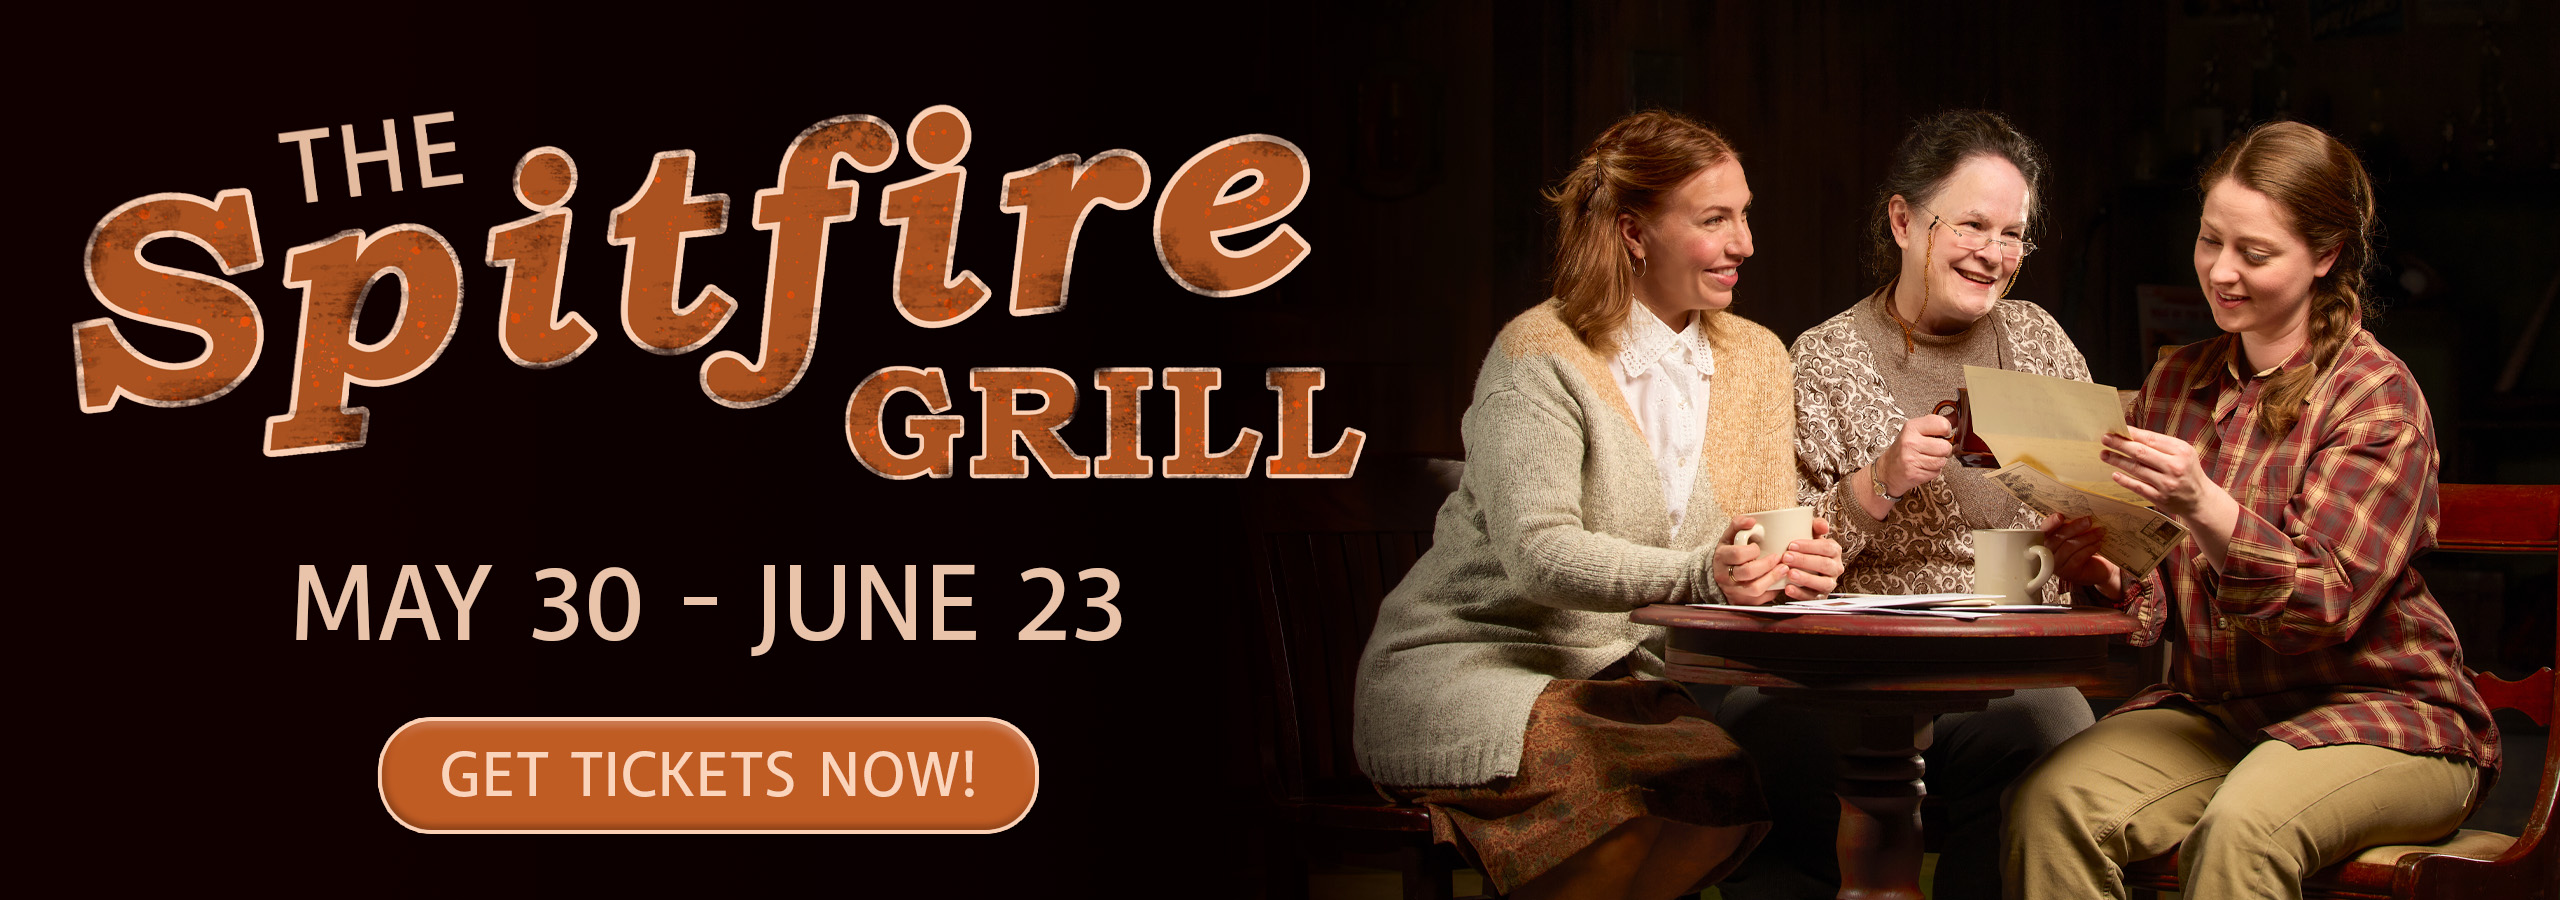 The Spitfire Grill. May 30 to June 23. Get your tickets now by clicking here.